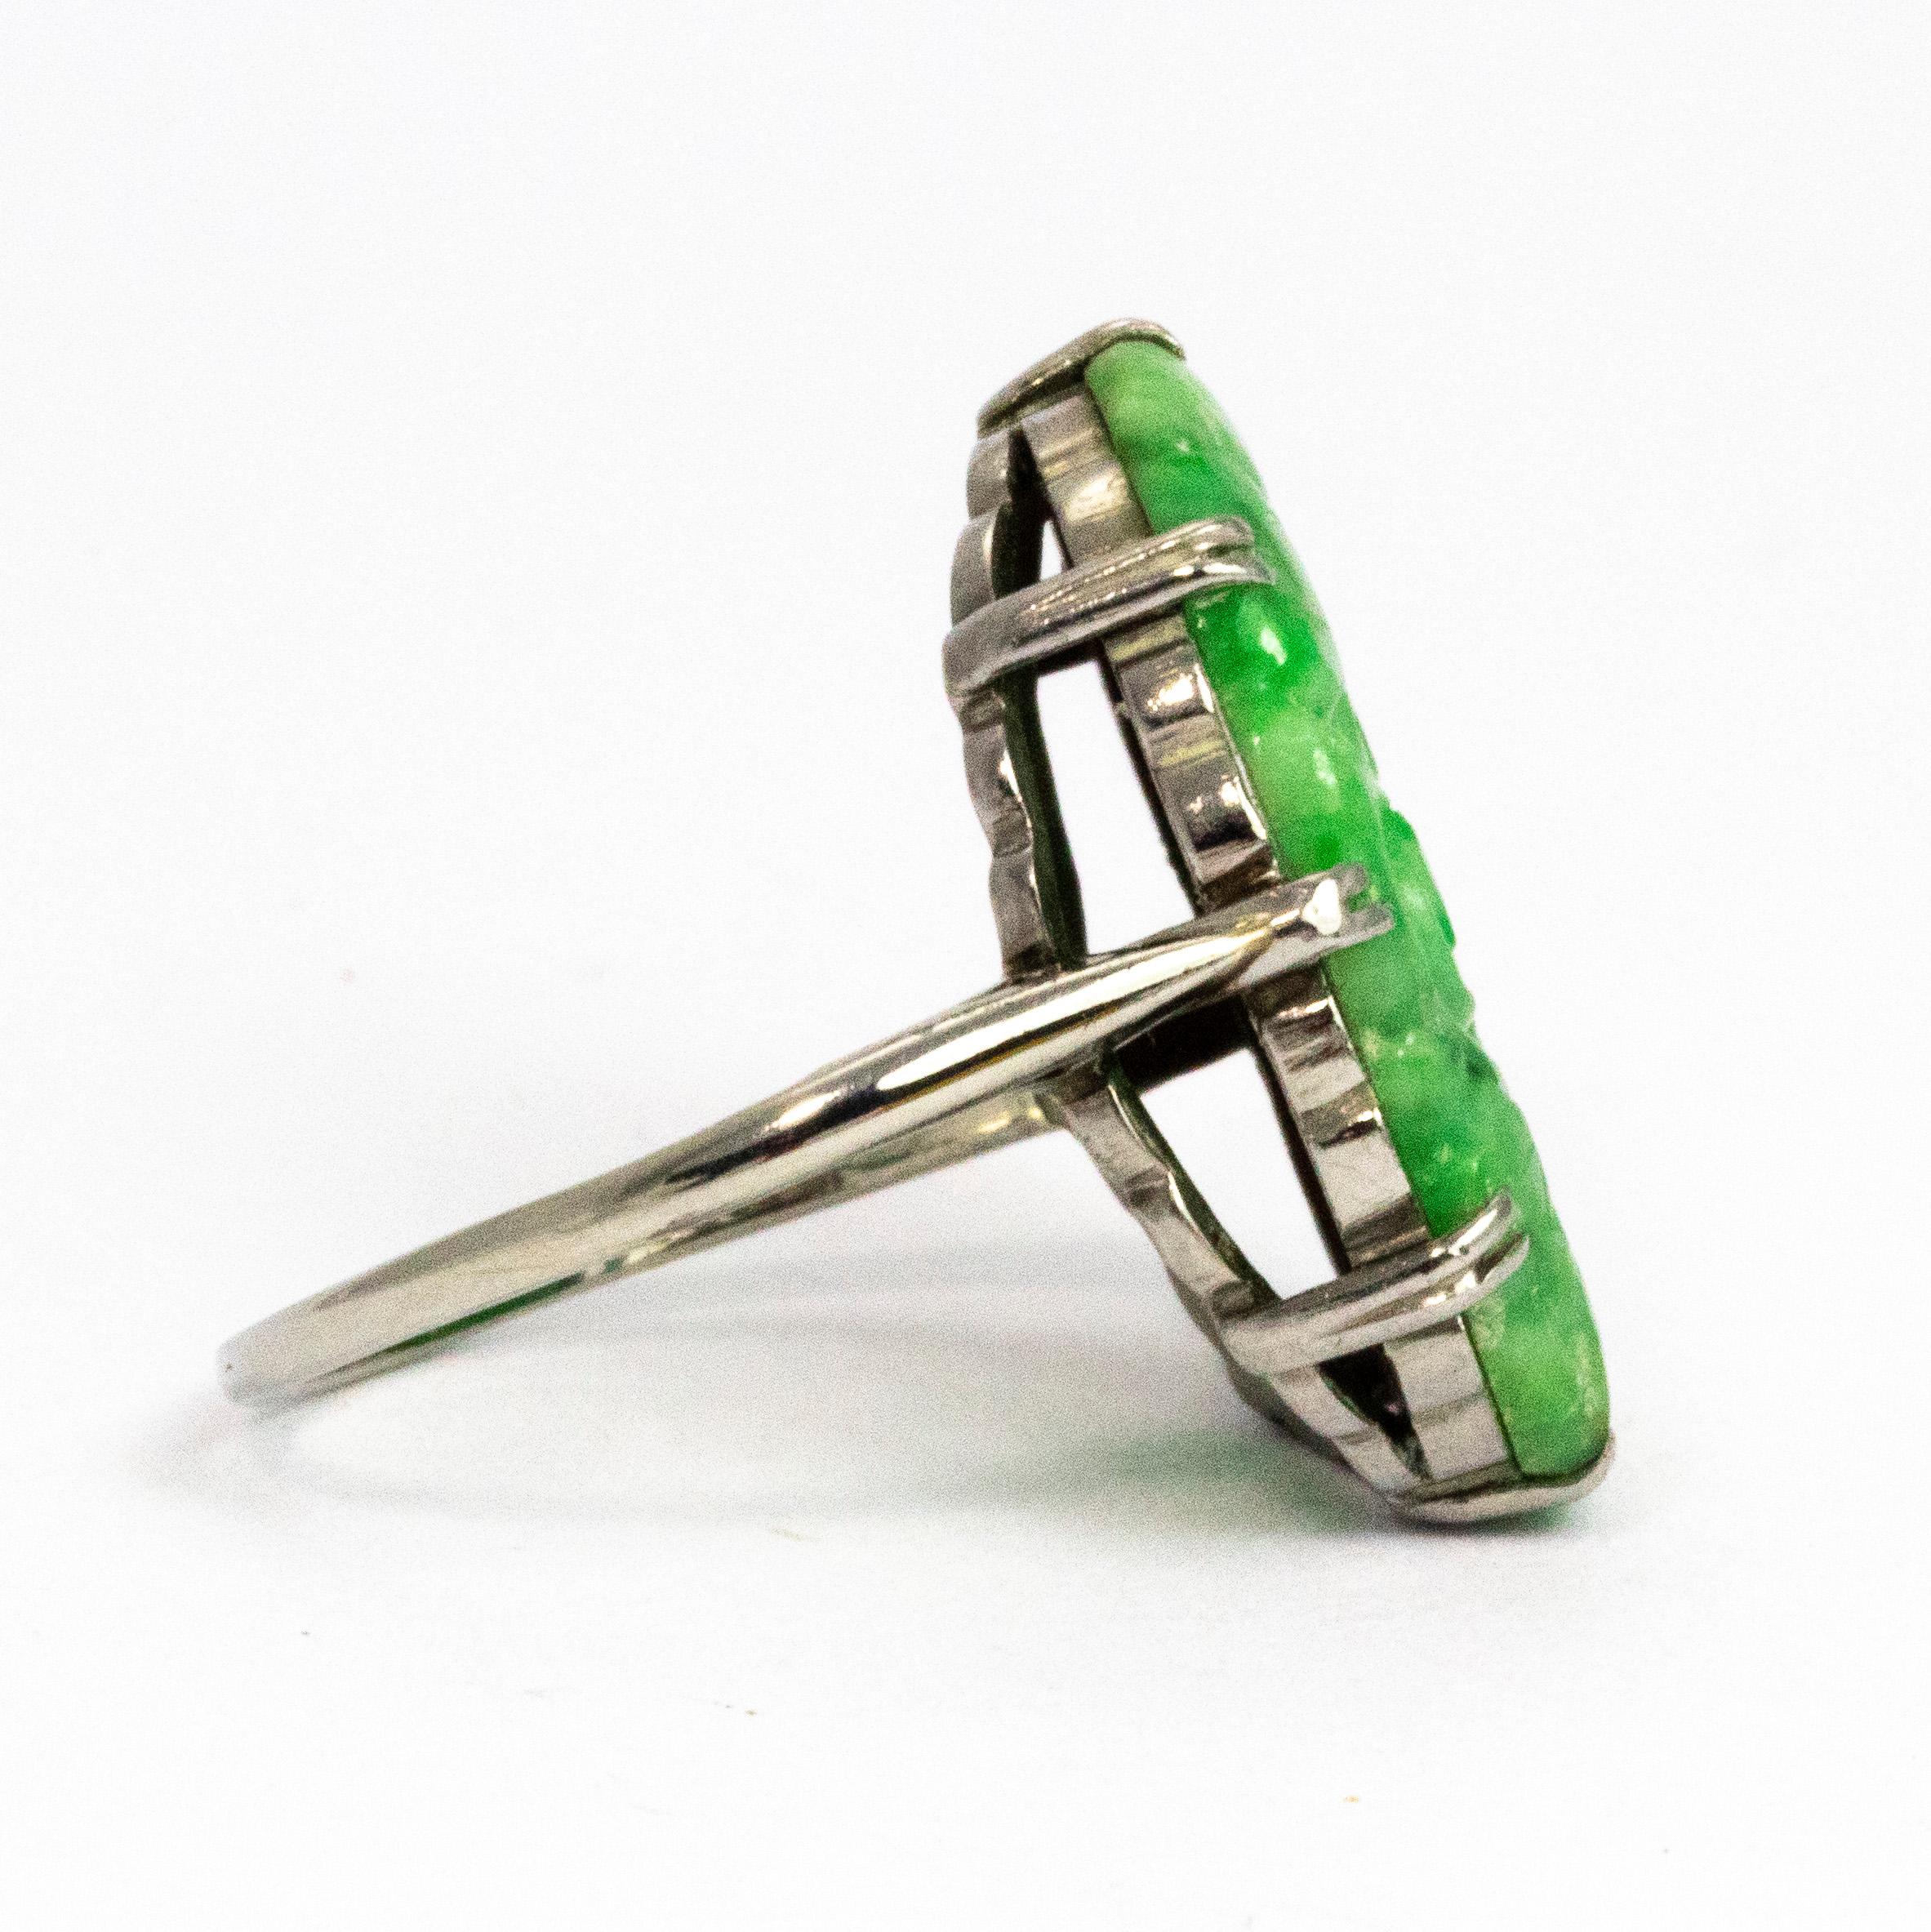 This ring has an Art Deco feel with the style of the engraving and the setting. The jade is beautifully engraved and is held with secure yet delicate double claws all the way around. Modelled in 18ct white gold. 

Ring Size: K 1/2 or 5 1/2
Stone